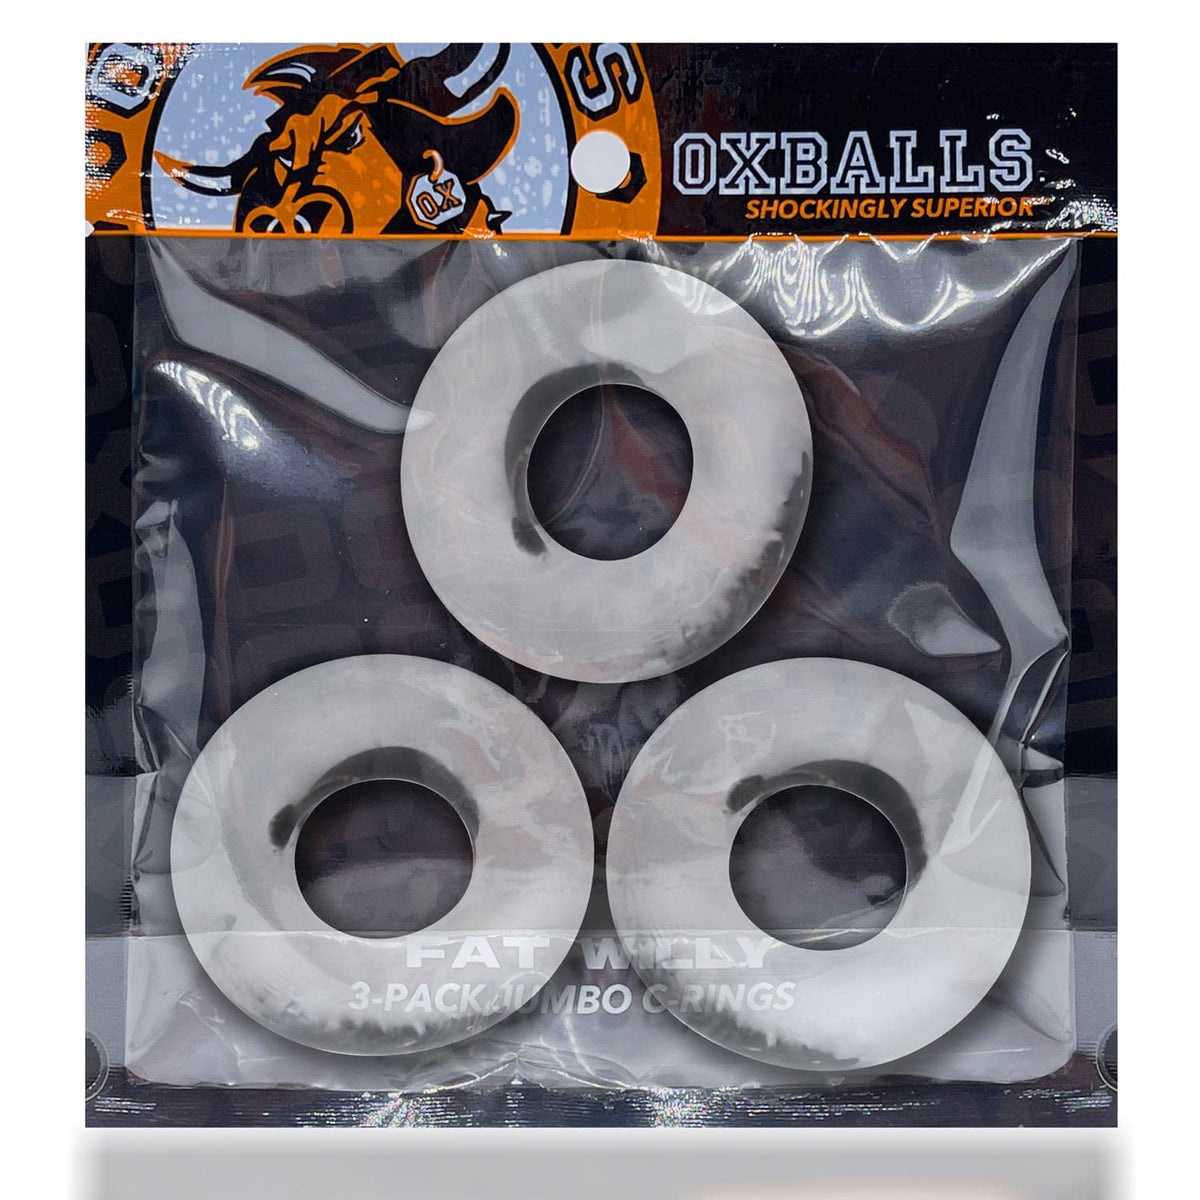 fat willy 3 pack jumbo c rings clear